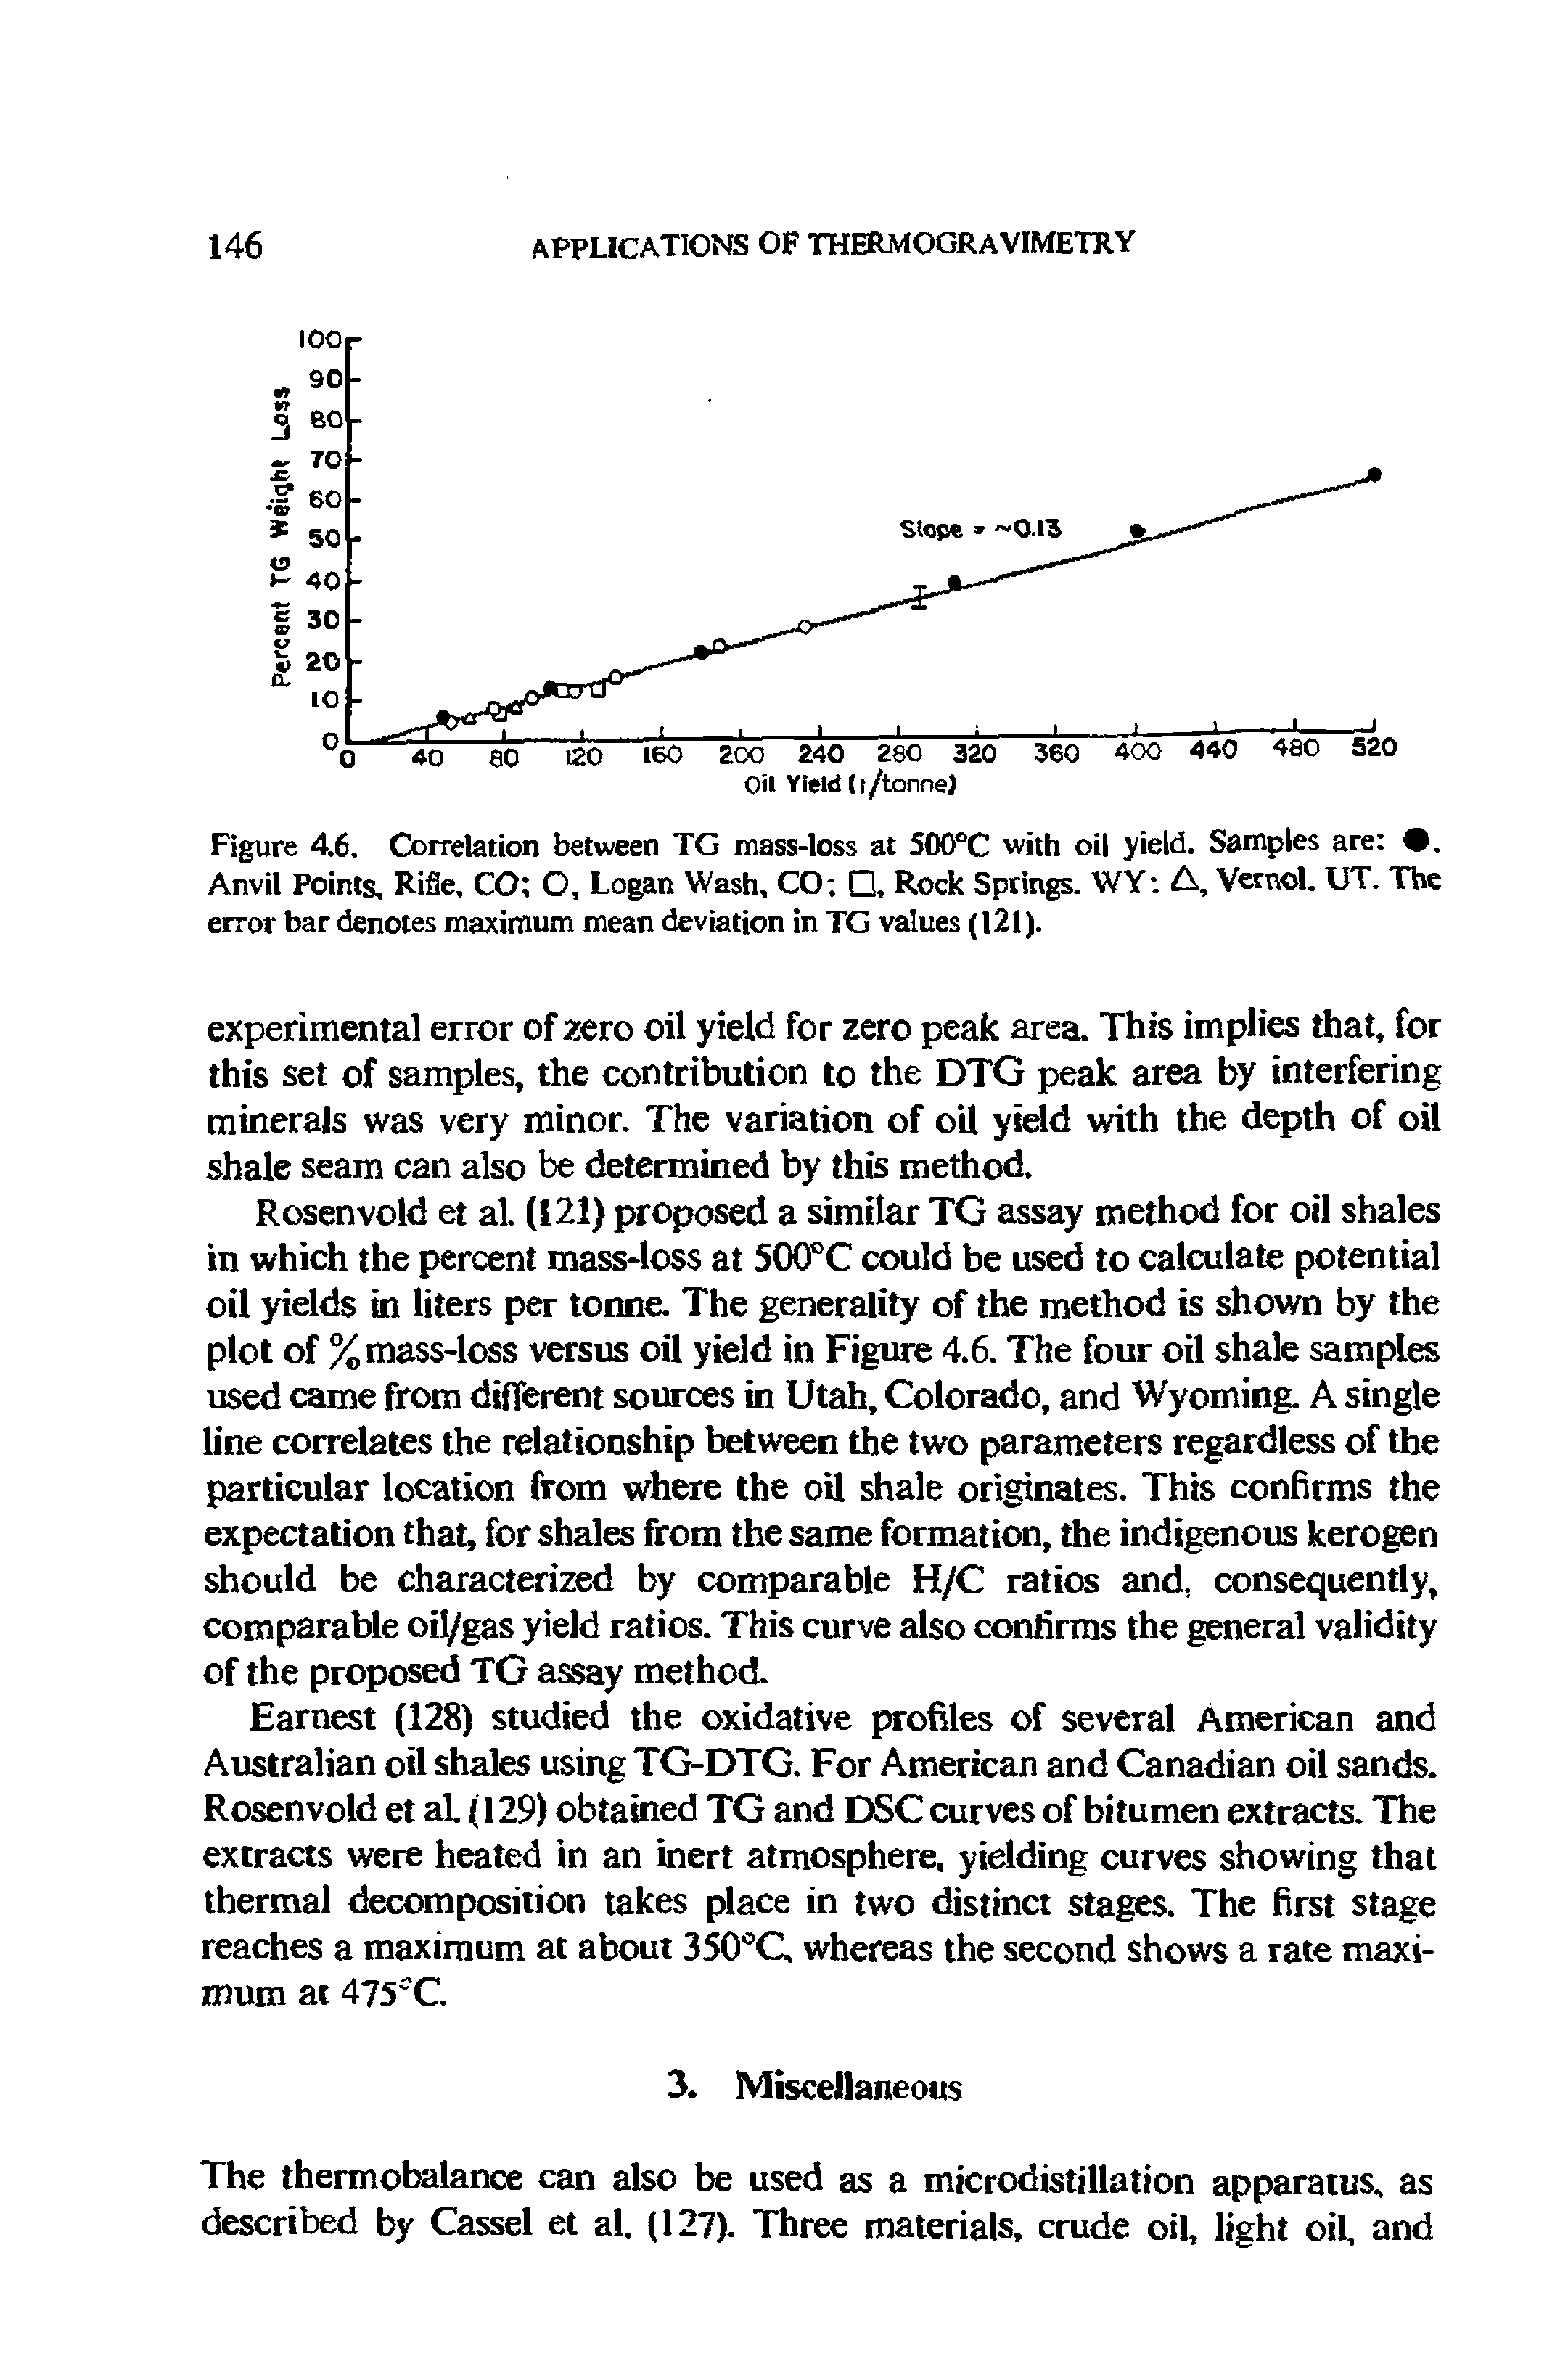 Figure 4.6. Correlation between TG mass-loss at 500°C with oil yield. Samples are . Anvil Points, Rifle, CO O, Logan Wash, CO , Rock Springs. WY A, Vernol. UT. The error bar denotes maximum mean deviation in TG values (121).